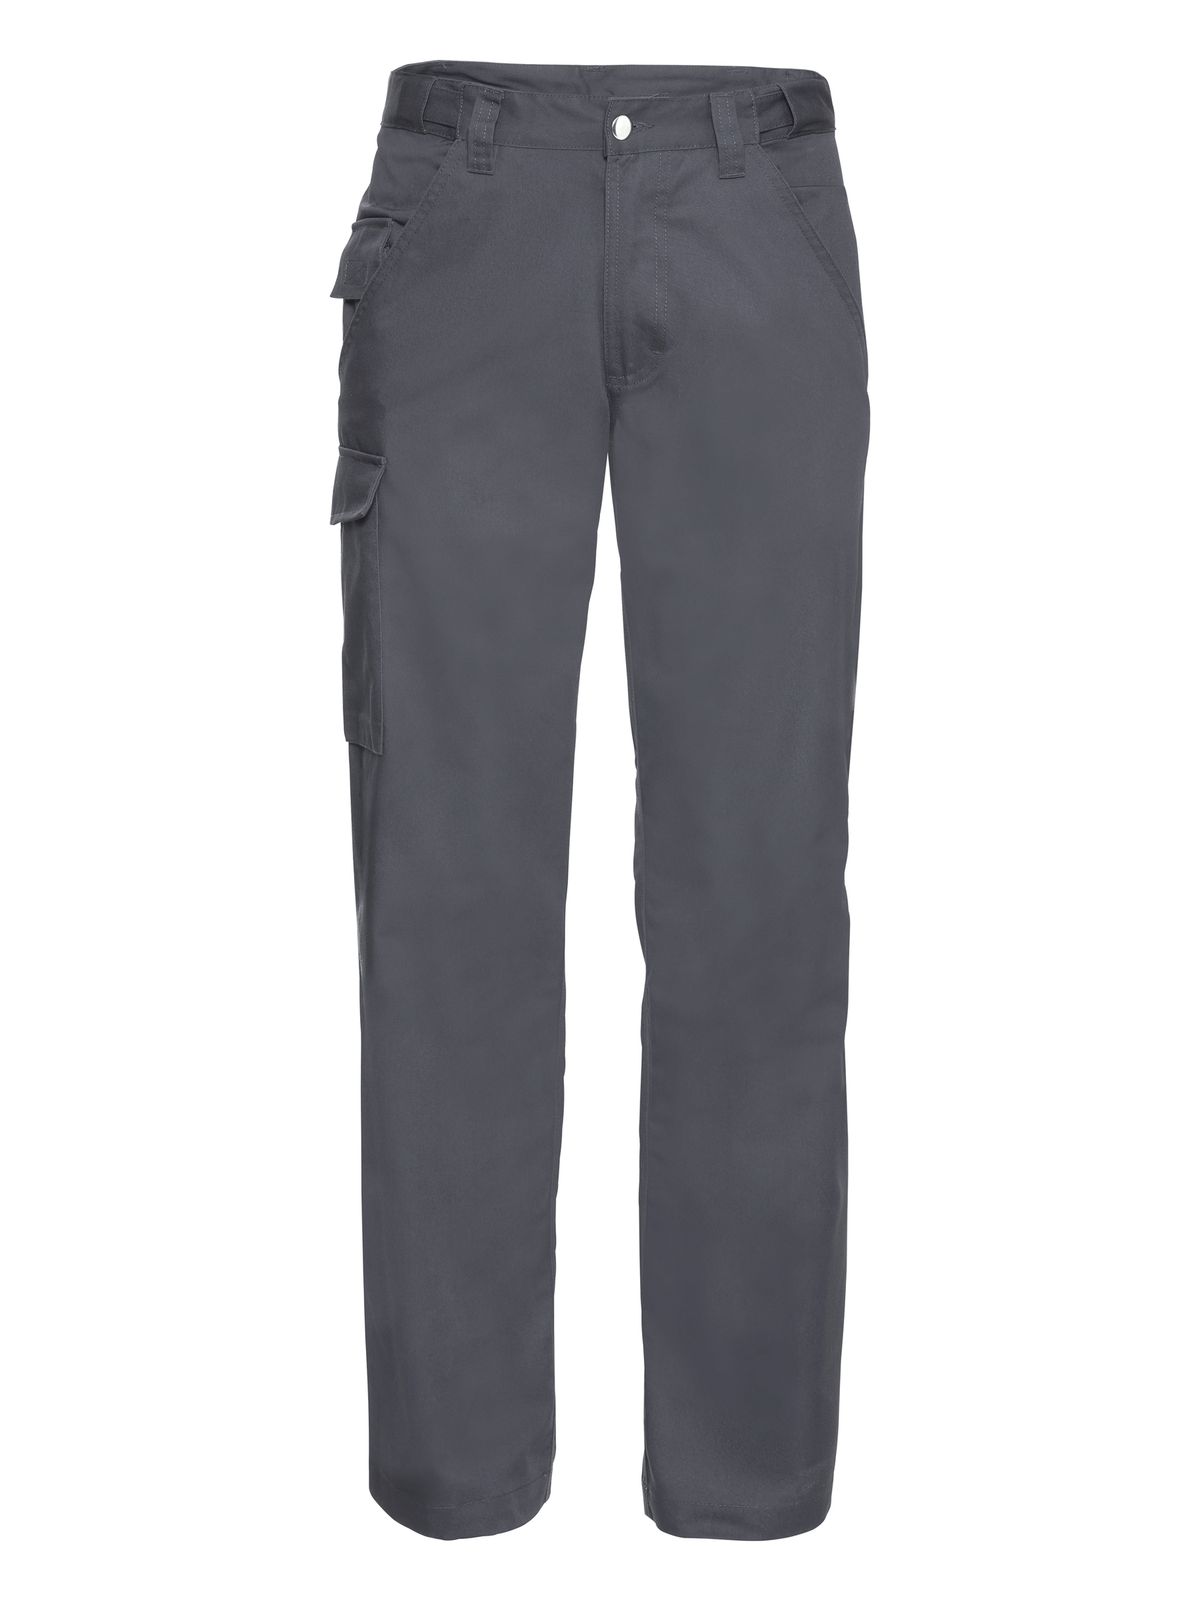 adults-polycotton-twill-trousers-convoy-grey.webp